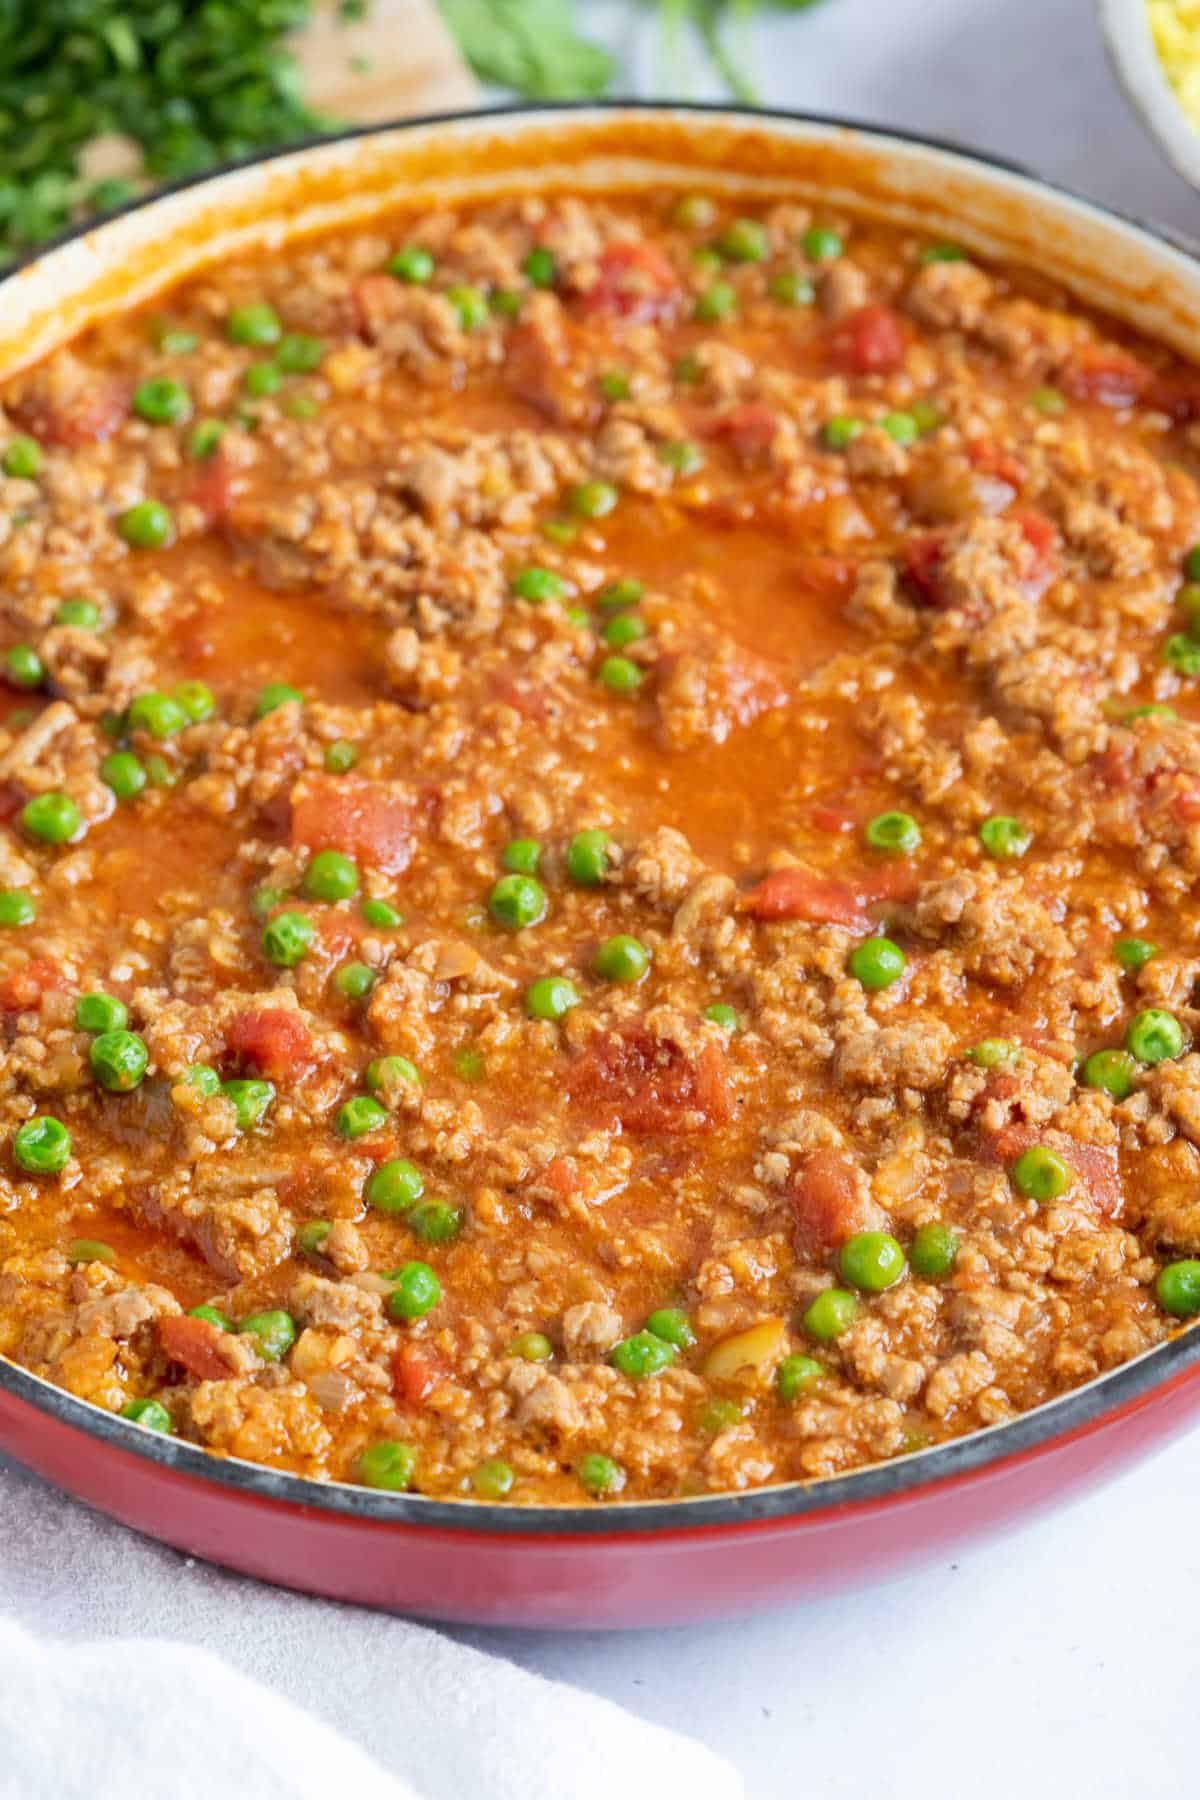 Turkey mince curry with peas.